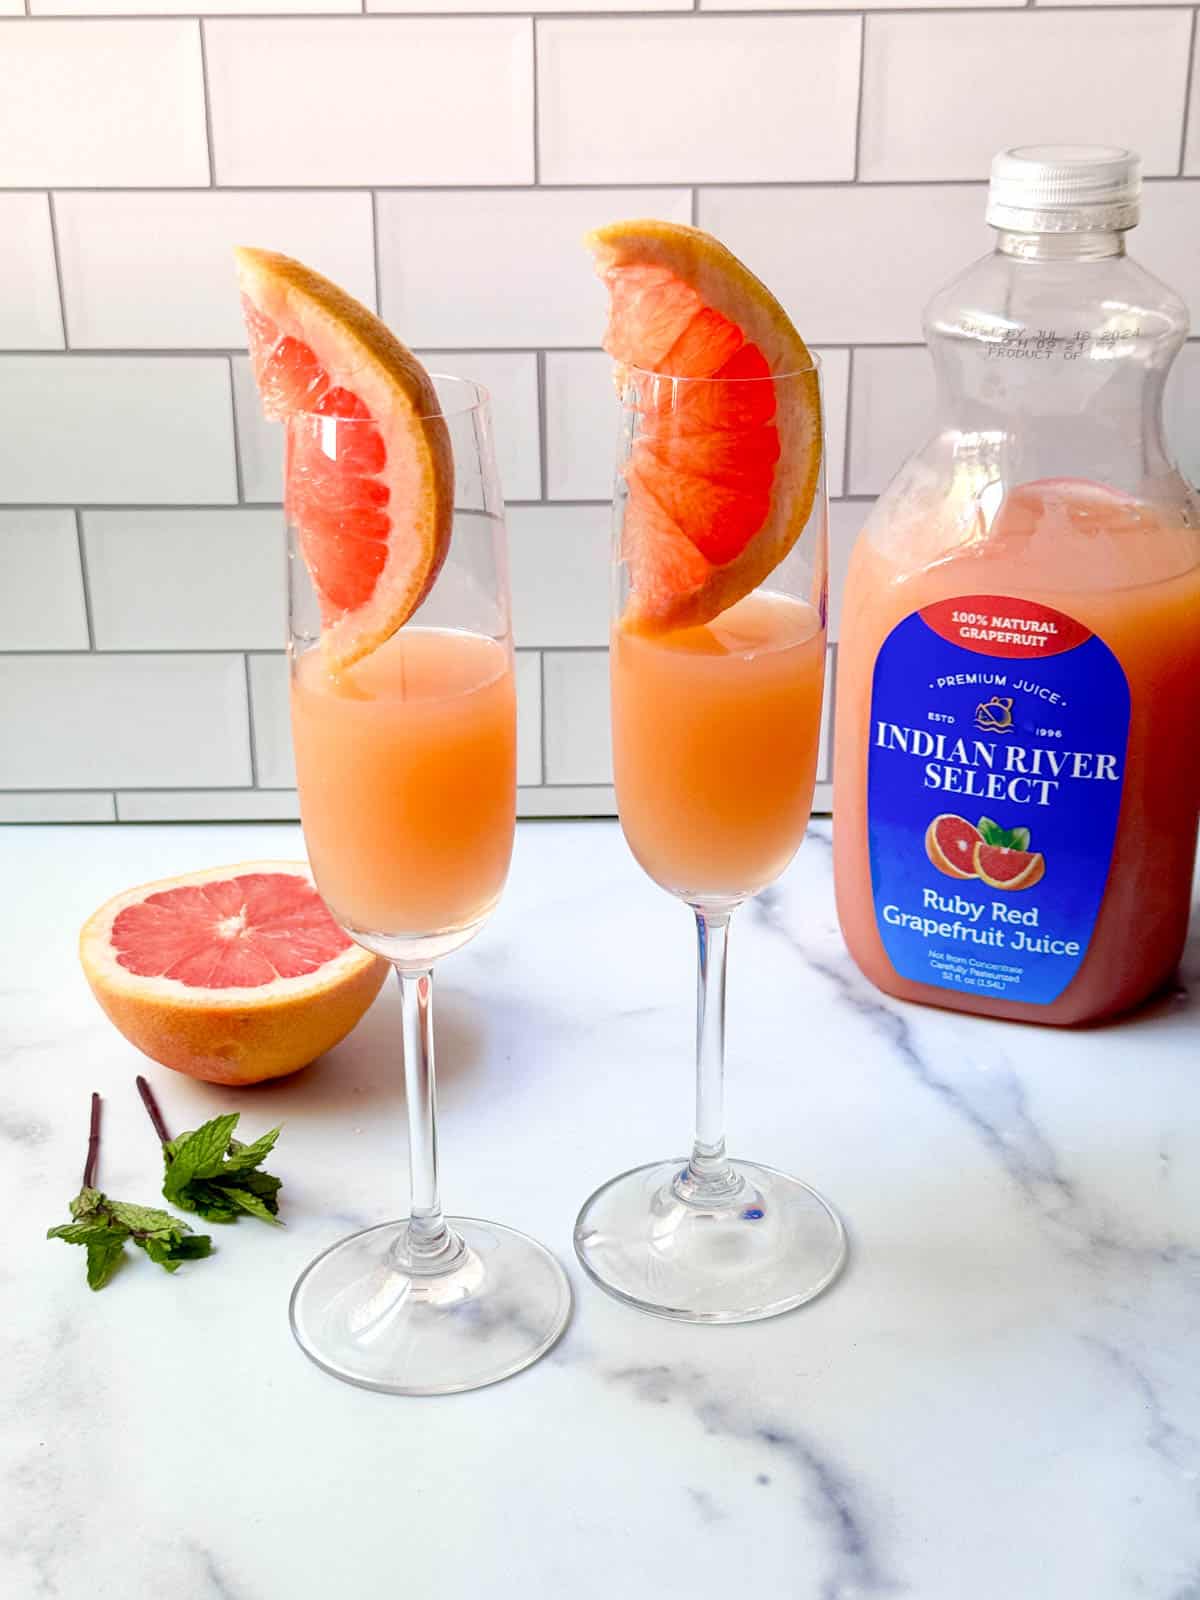 Grapefruit juice and grapefruit slices in a flute glass on the counter with fresh grapefruit, mint and a bottle of juice.